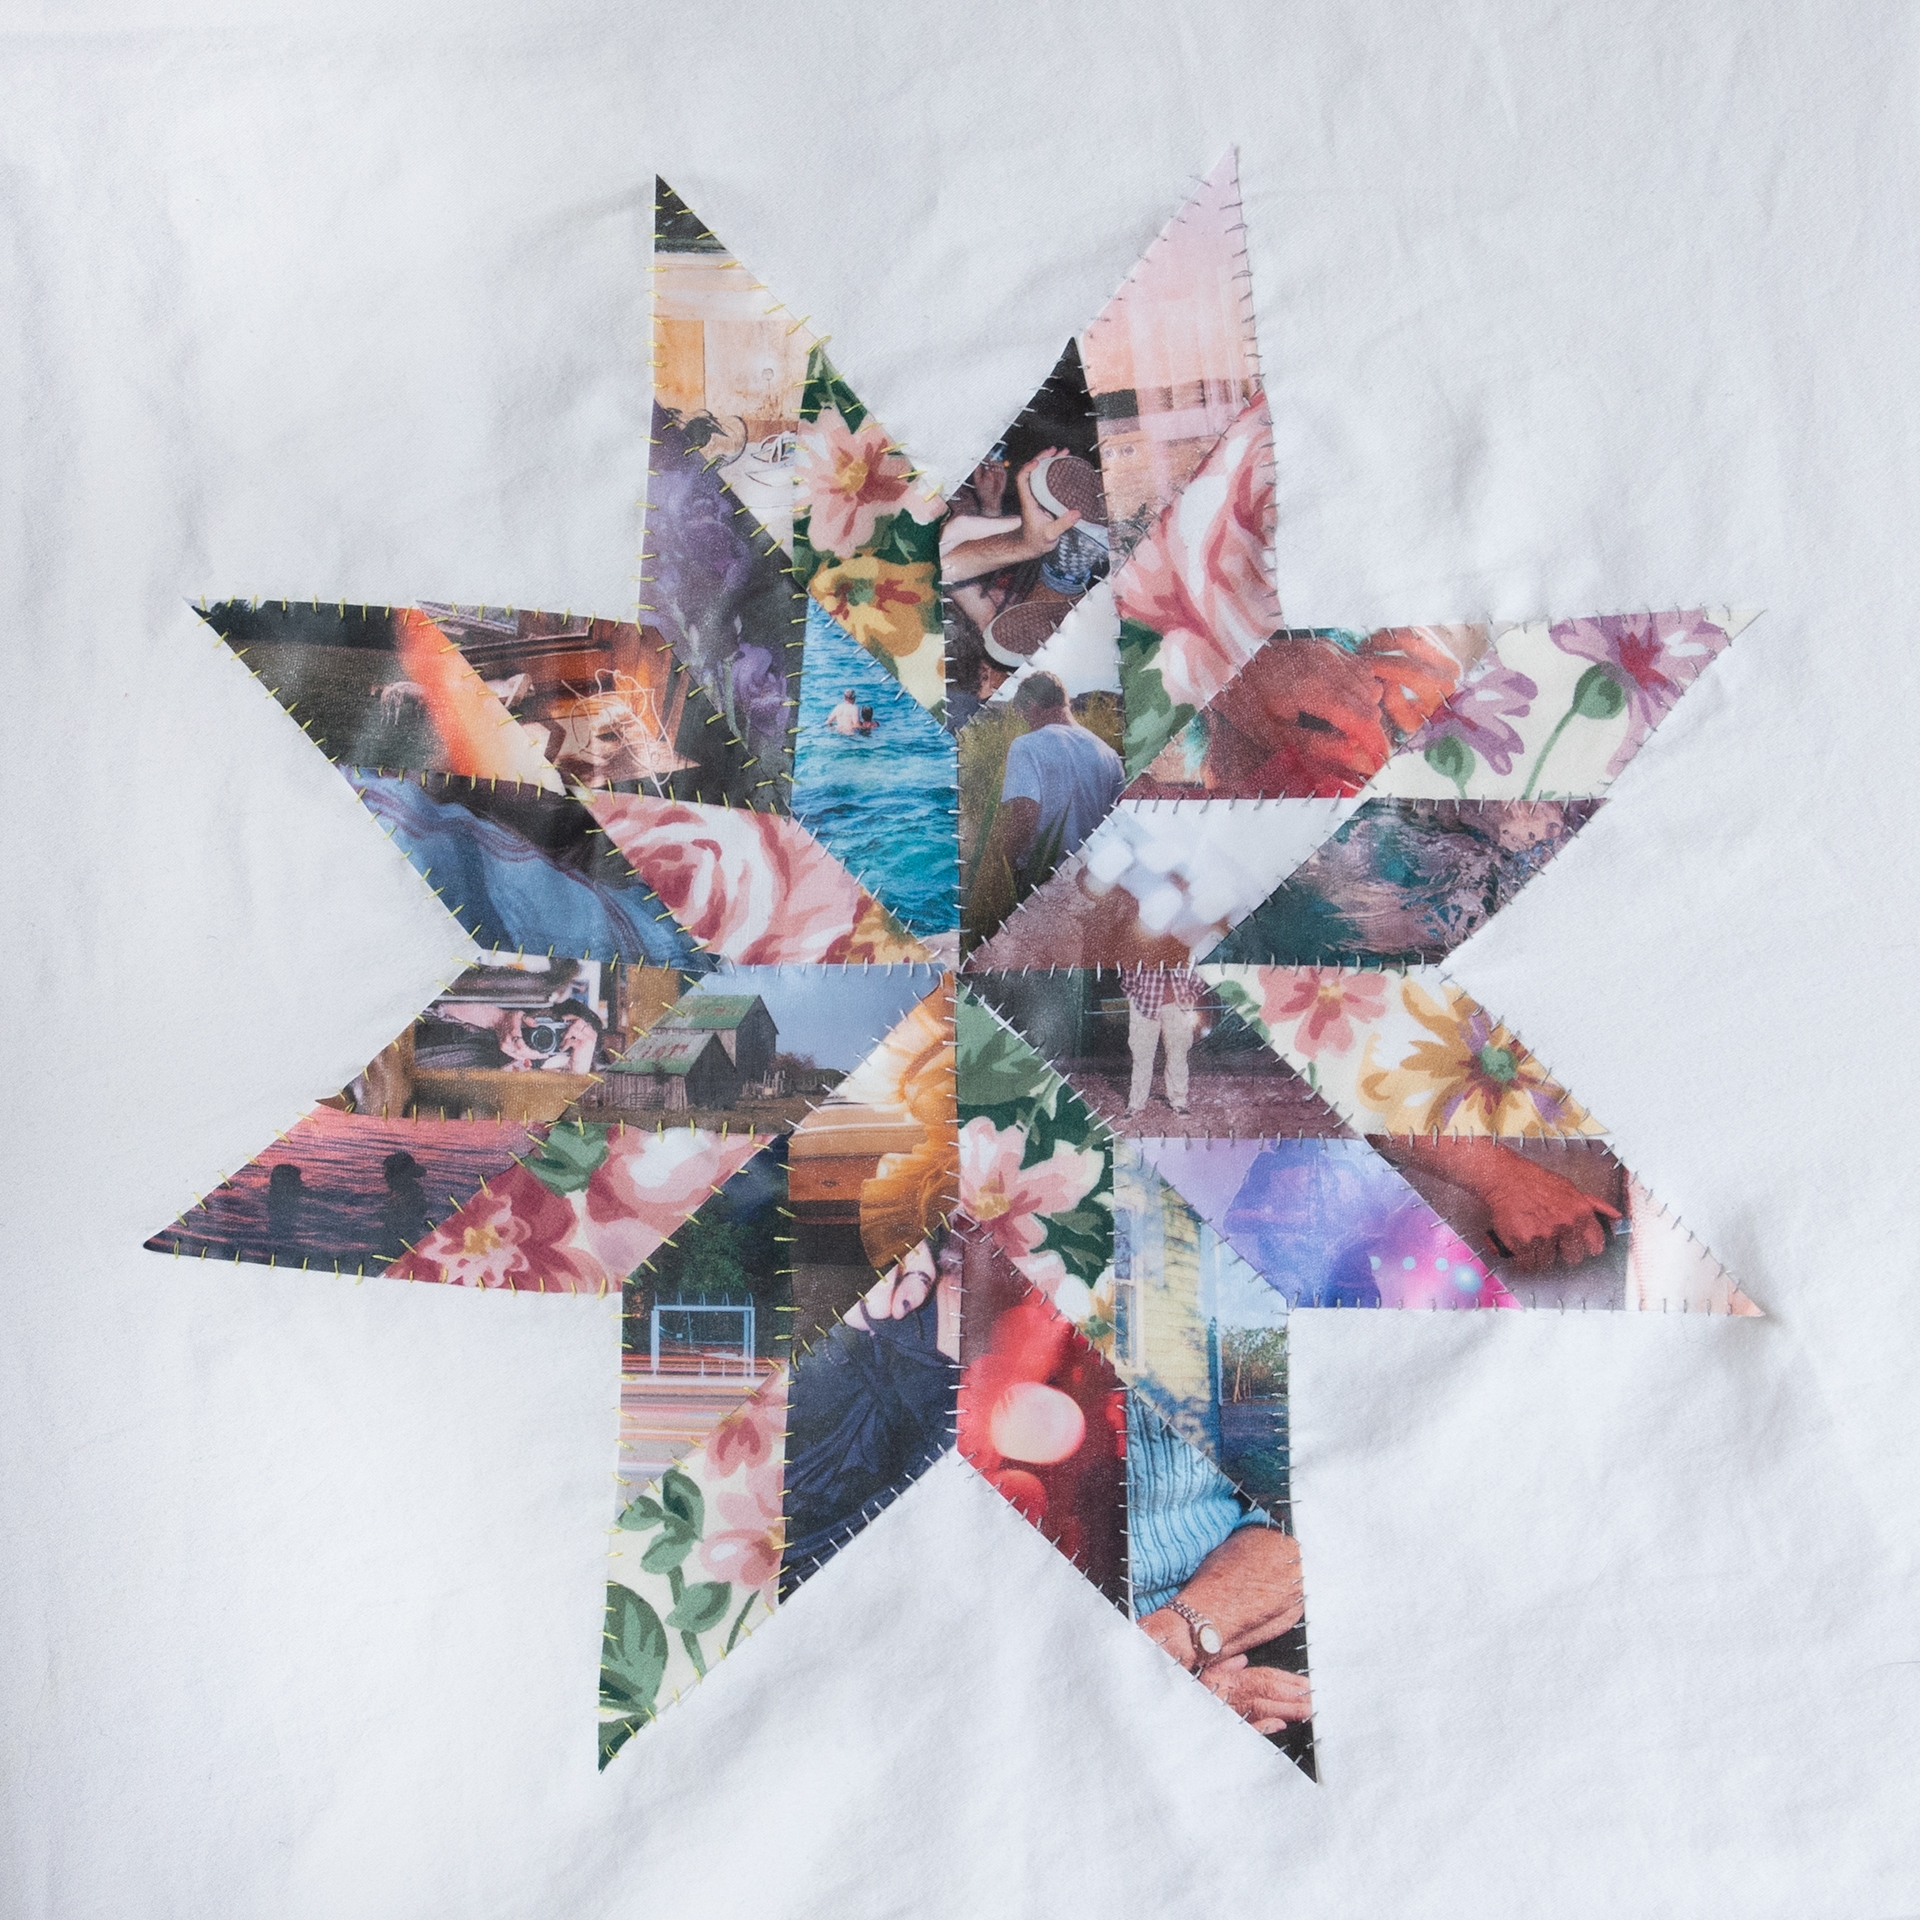 Star Blanket: A hand-sewn eight point star design inspired by Indigenous star blankets/quilts. The diamond shapes are printed archival images from the artist and their idea of home; some images include friends, family, summer vacations, concerts, and places that feel comforting. There are also a few diamond shapes that have been cut from a floral fabric. The design is backed onto a white cotton bedsheet.